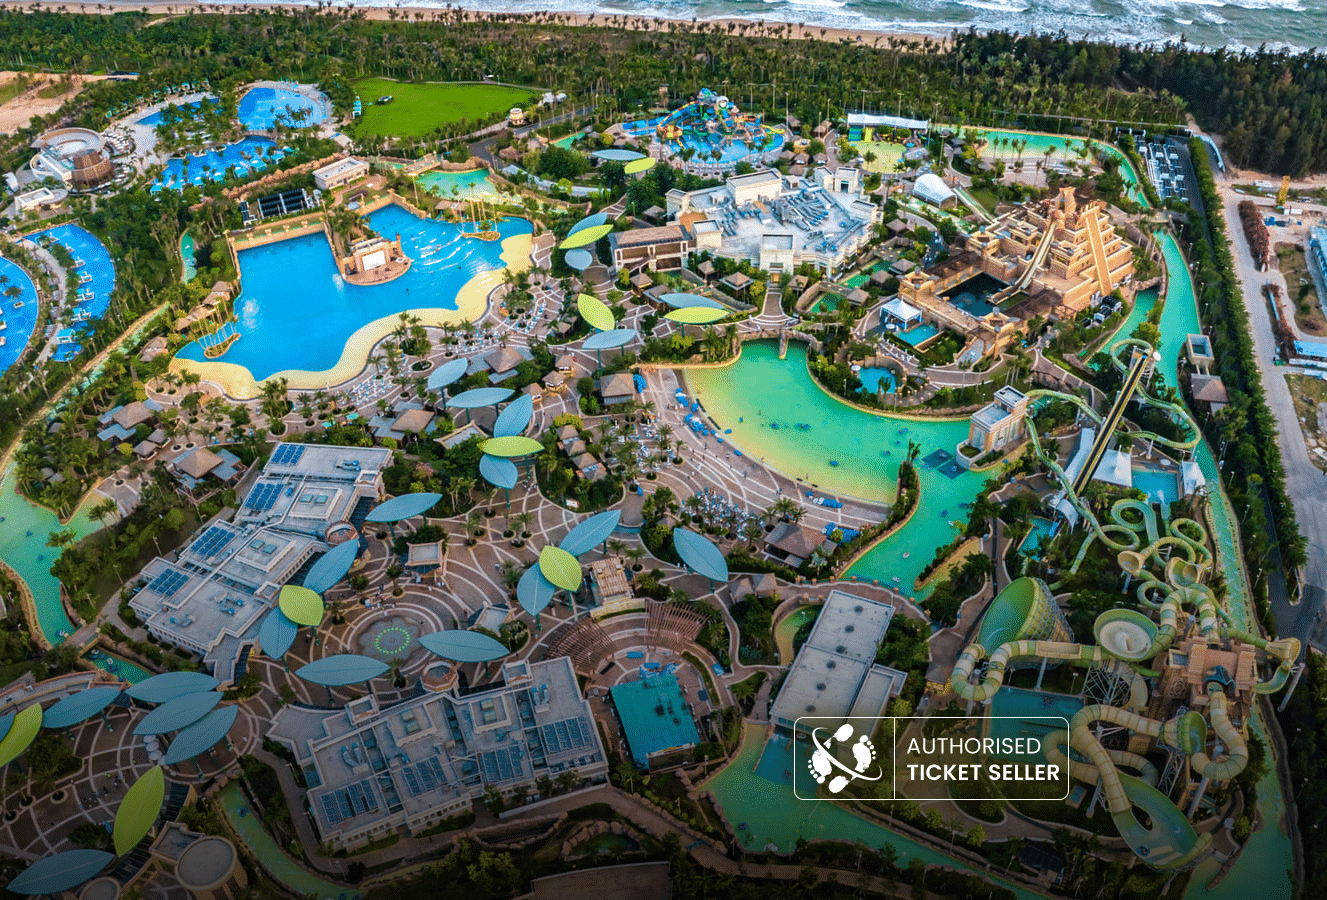 Enjoy a fun time with your family and friends at Atlantis Aquaventure Waterpark 